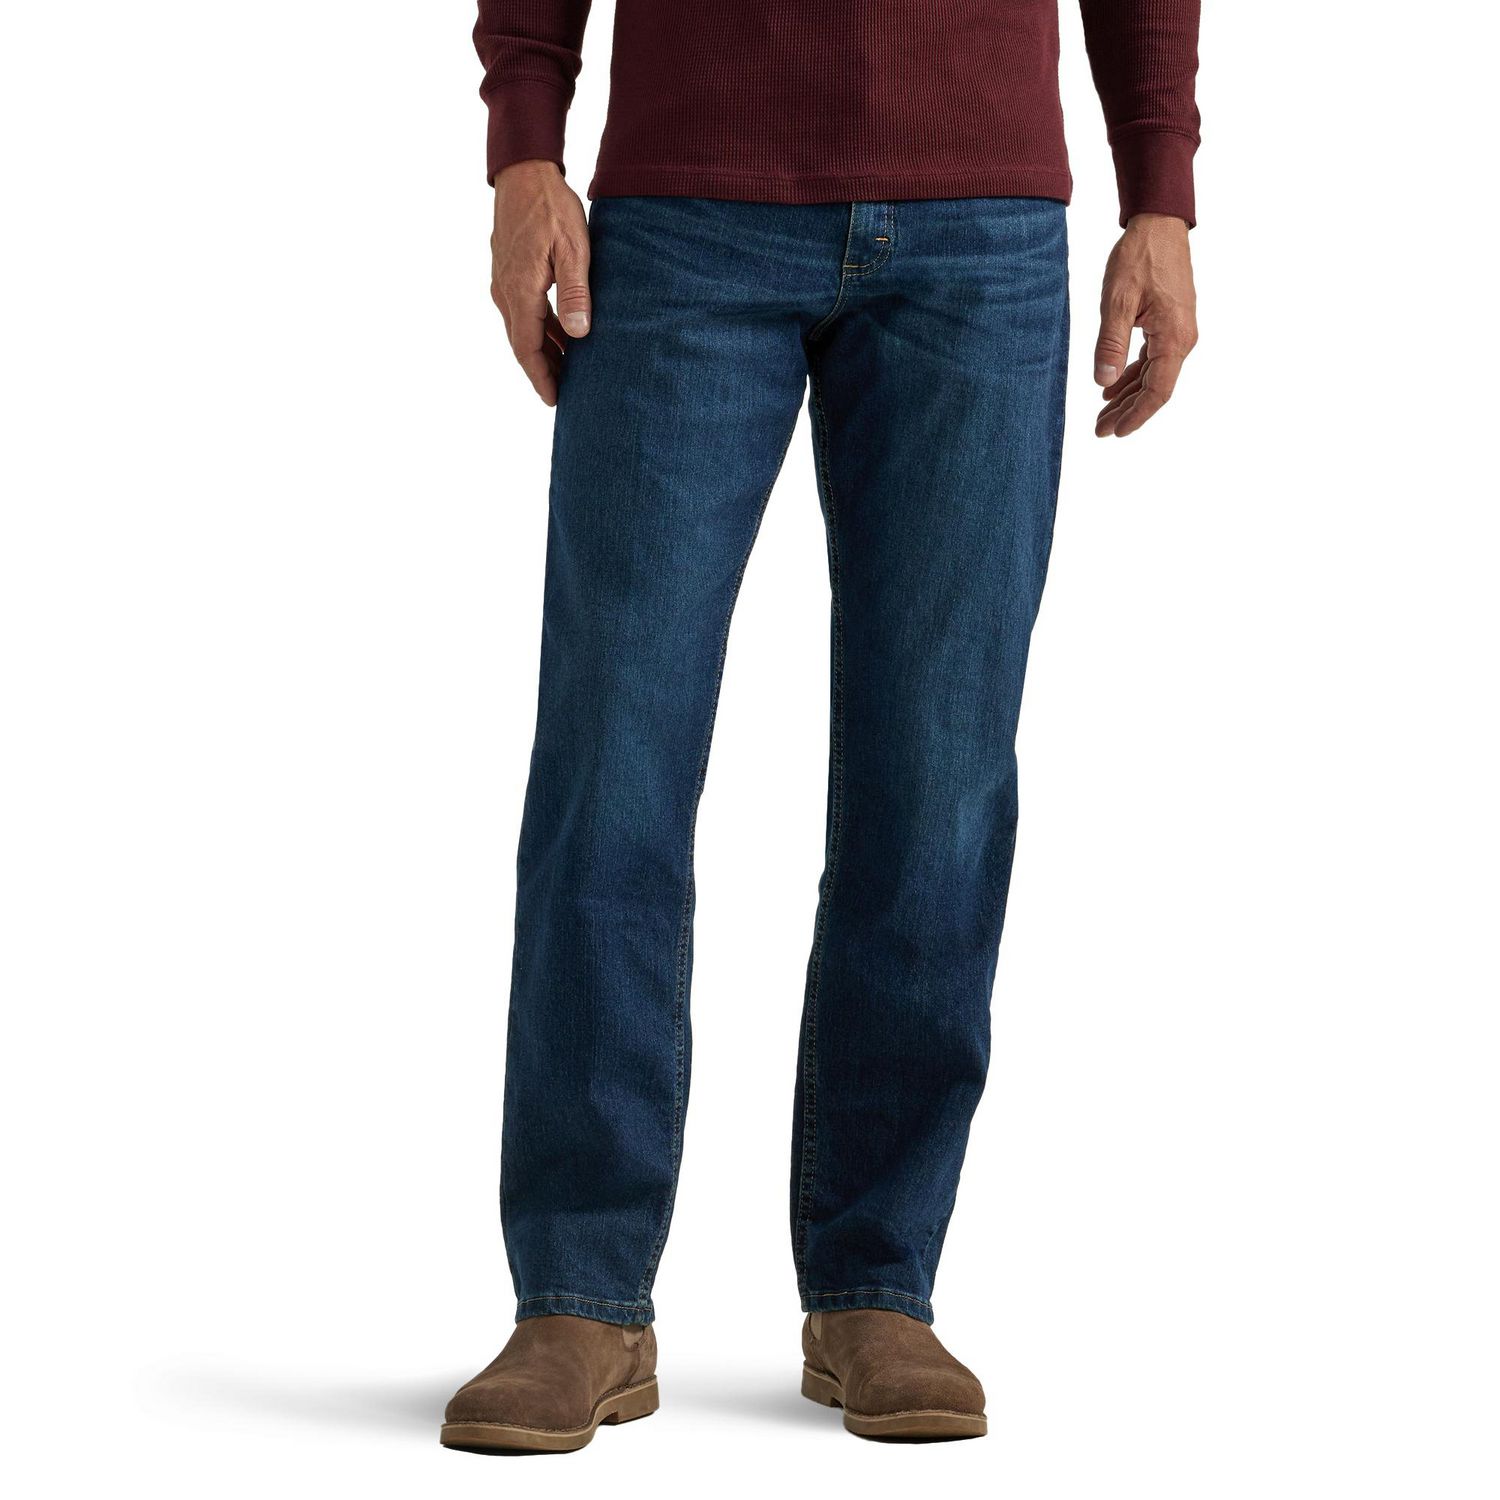 Wrangler Men's Five Star Relaxed Fit, Relaxed Fit 